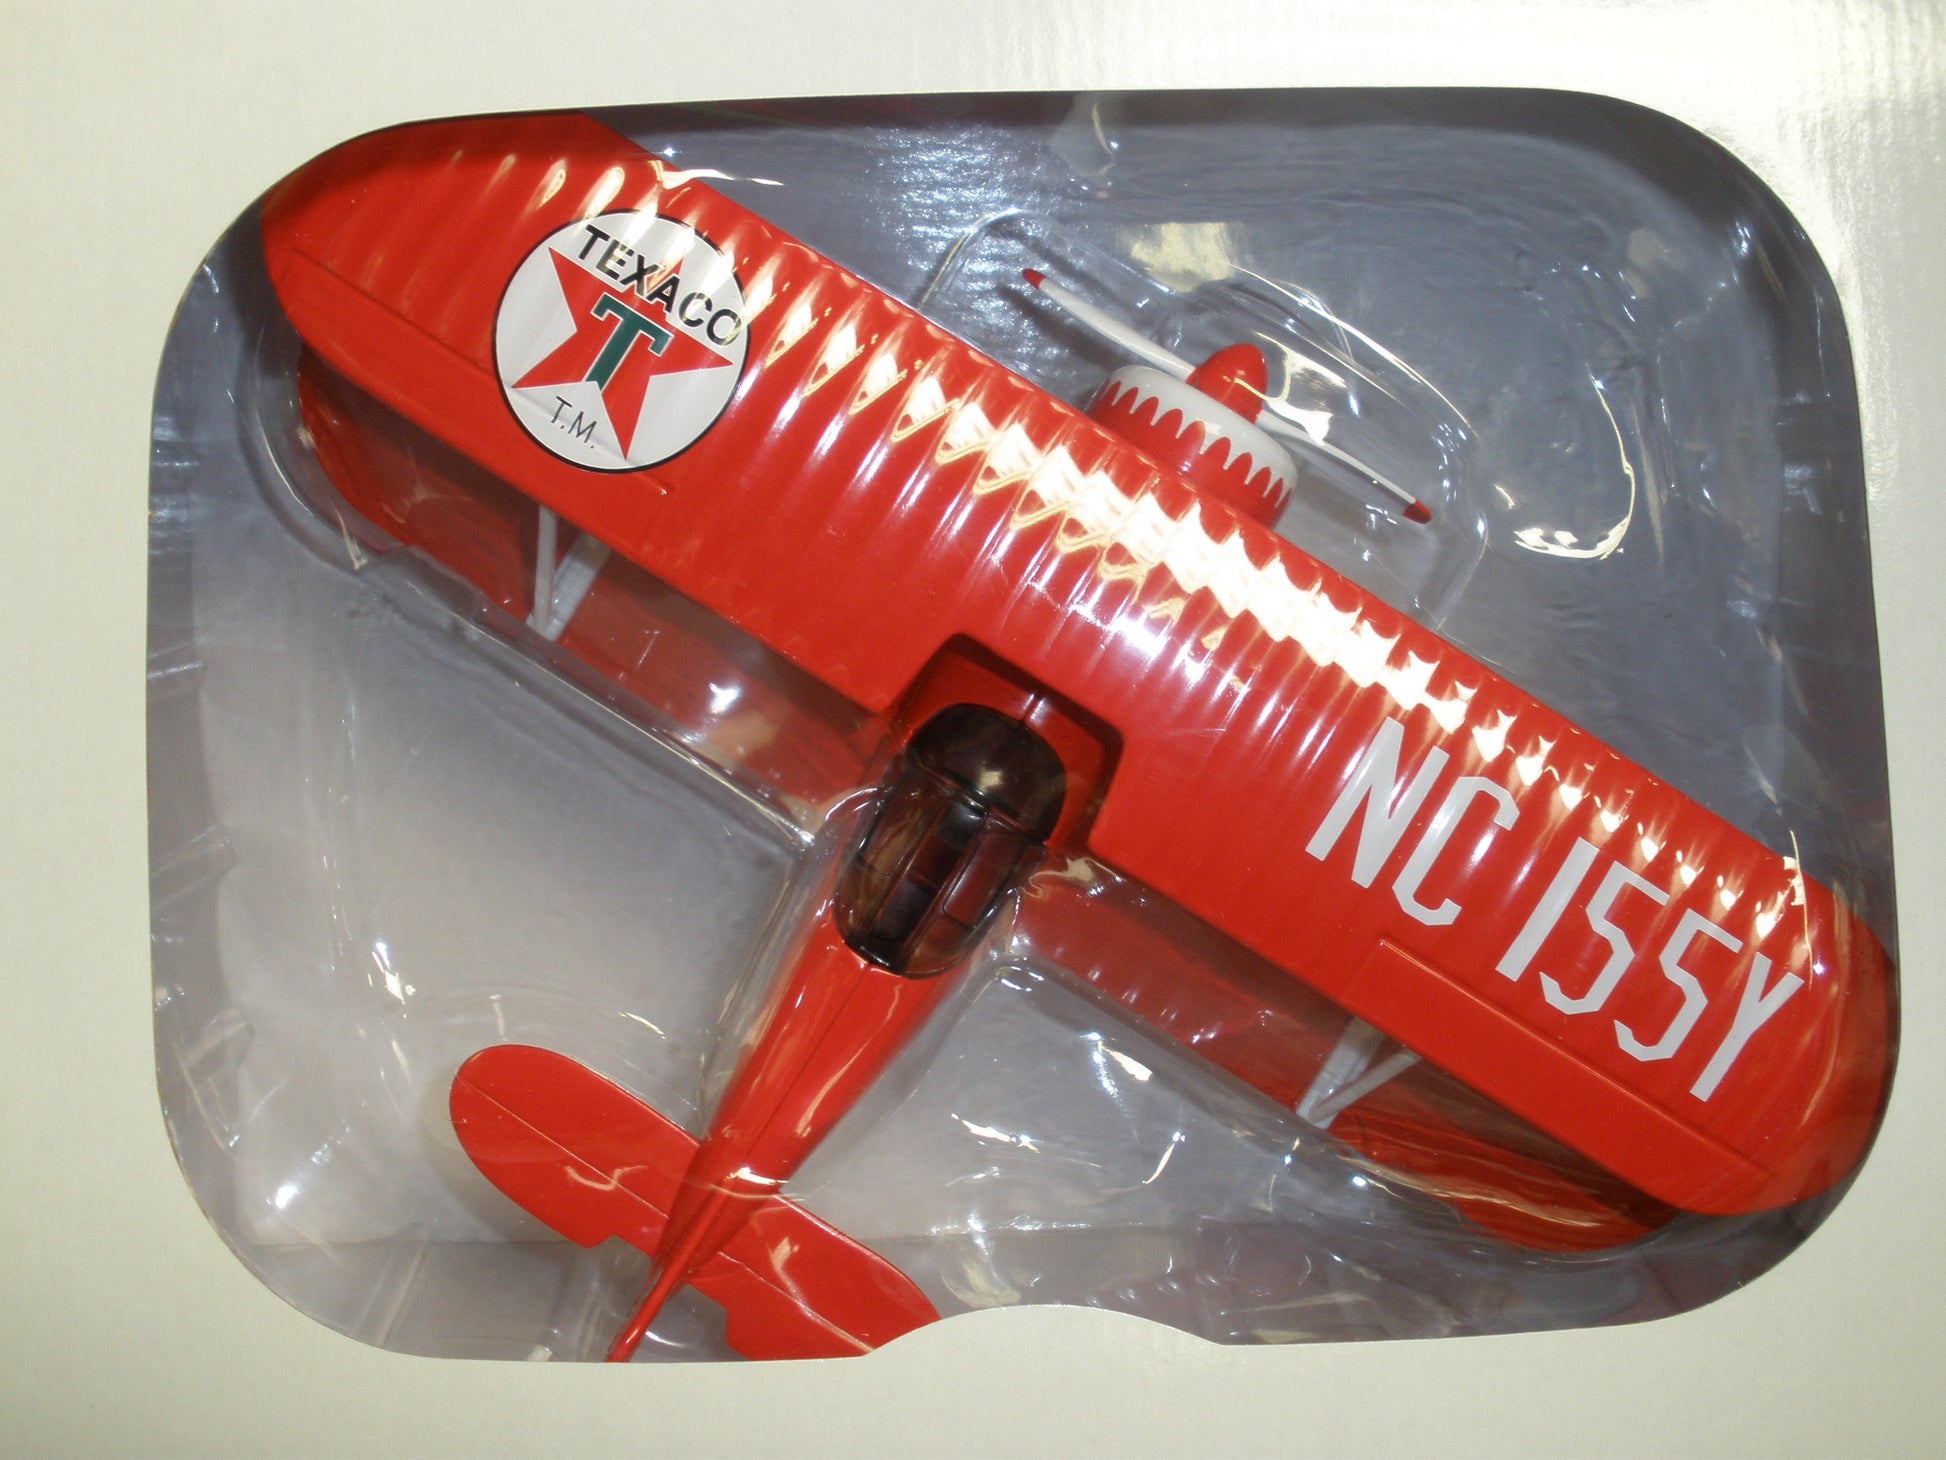 Texaco Waco Staggerwing SAMPLER - Red Only